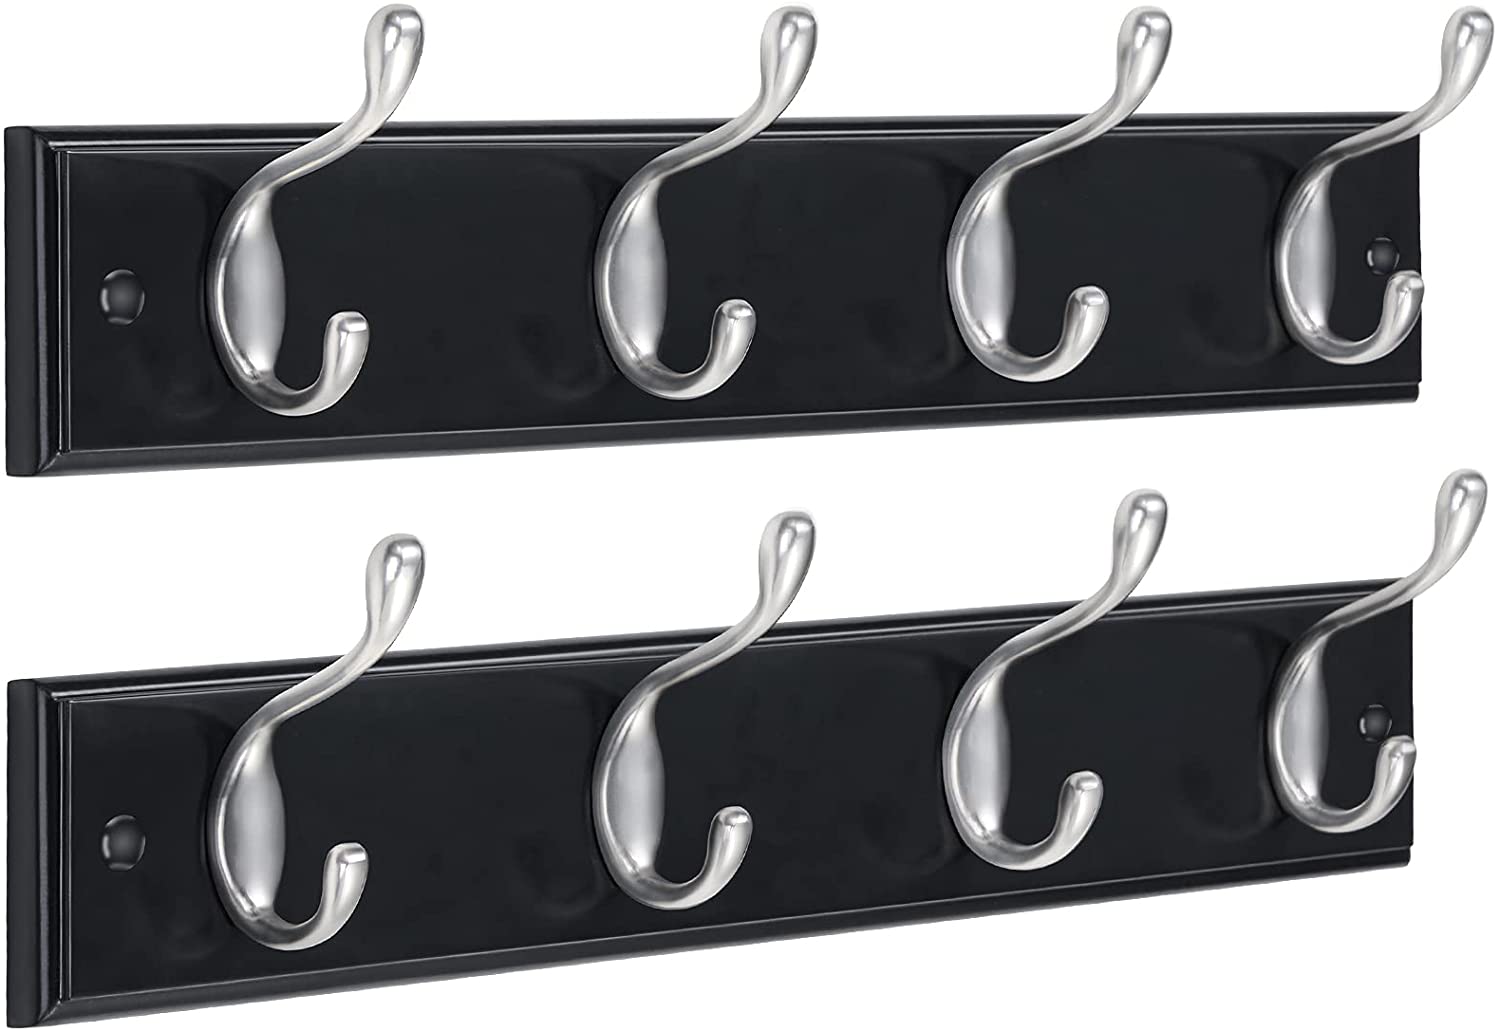 2-PACK Coat Hook Wall Hanger for $11.99 + Free Shipping w/ Prime